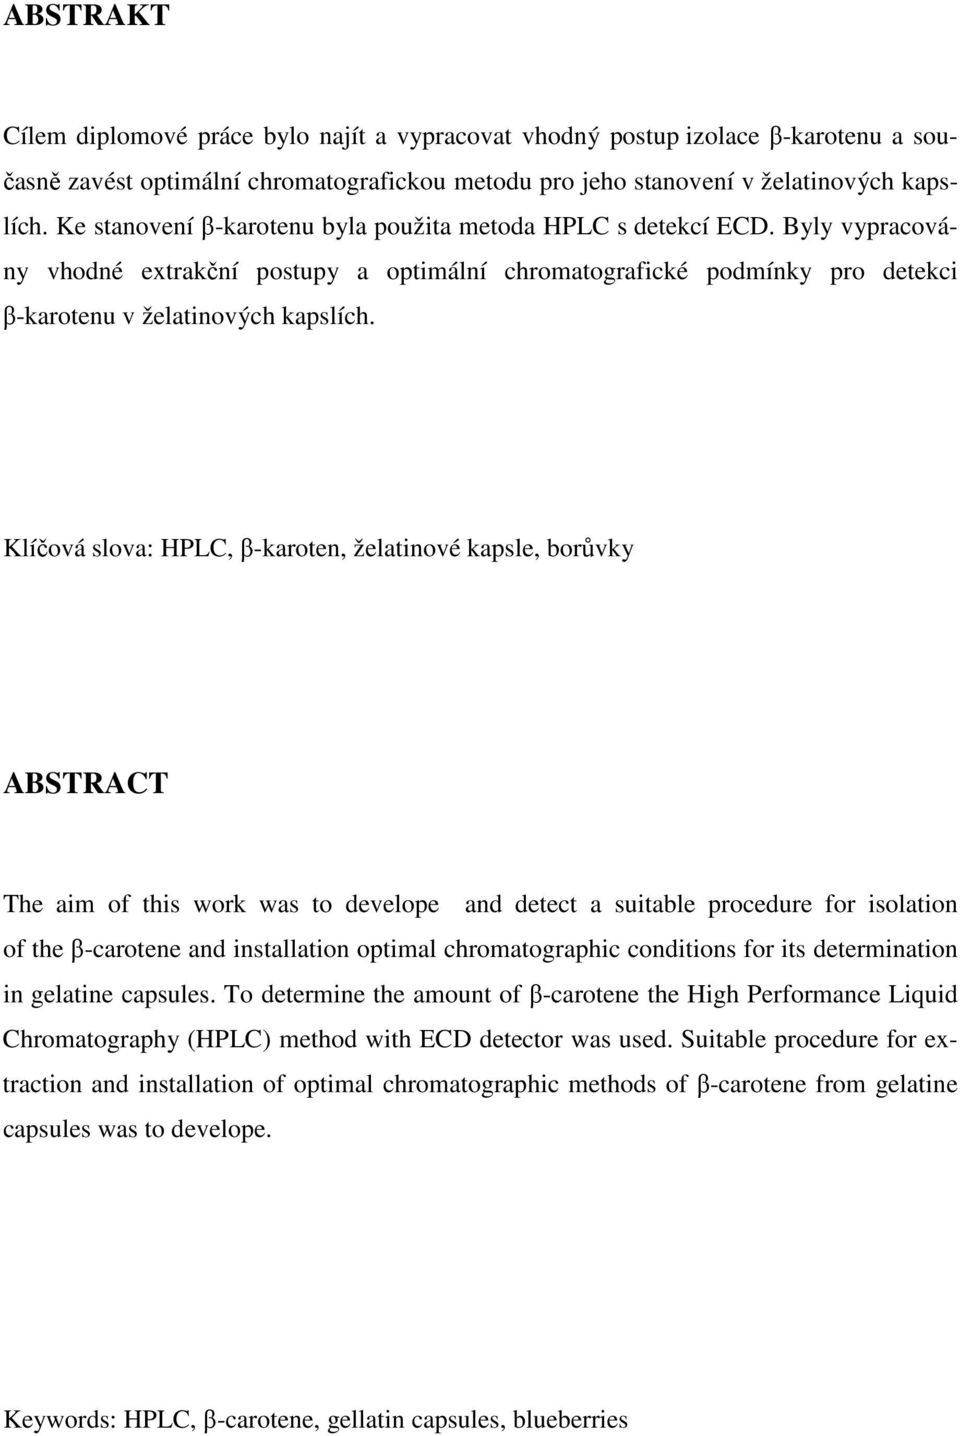 Klíčová slova: HPLC, β-karoten, želatinové kapsle, borůvky ABSTRACT The aim of this work was to develope and detect a suitable procedure for isolation of the β-carotene and installation optimal